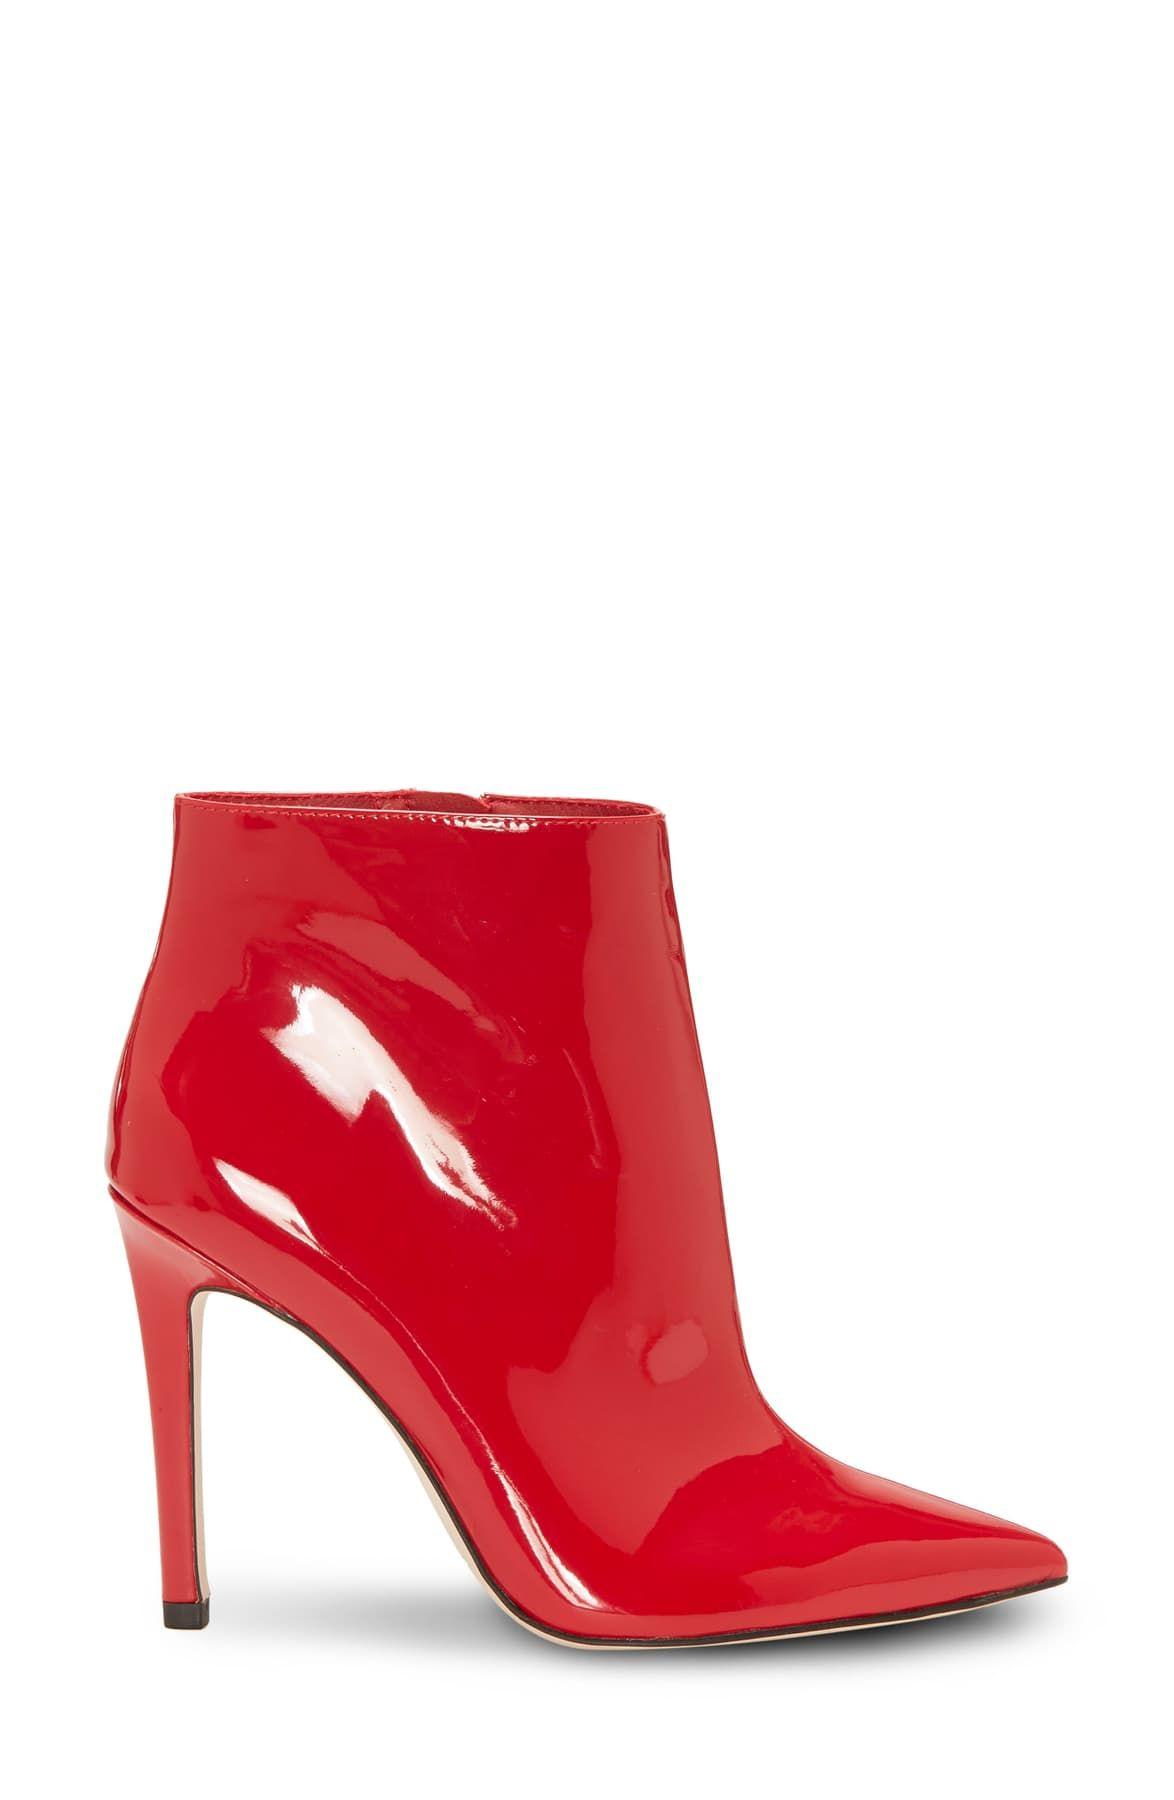 Jessica Simpson Perci Bootie in Red 